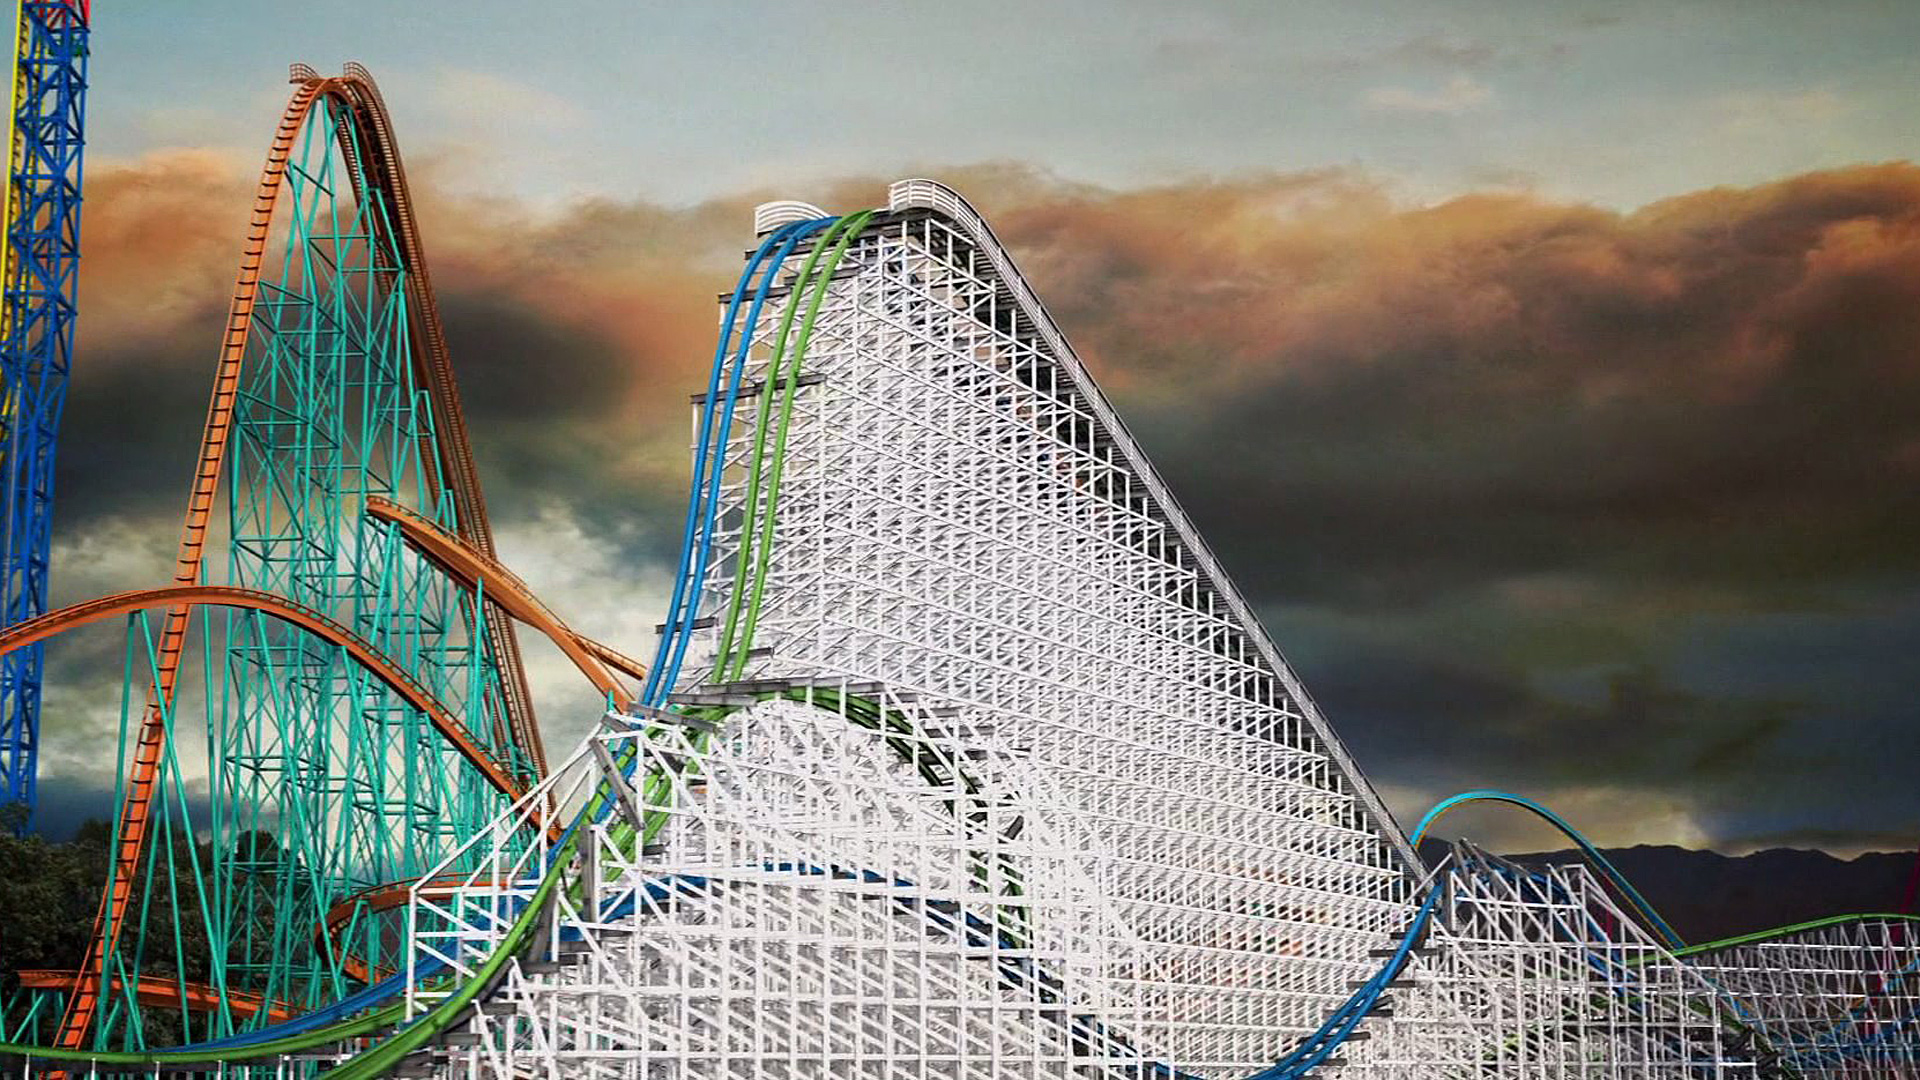 A preview image of Twisted Colossus provided by Six Flags Magic Mountain.